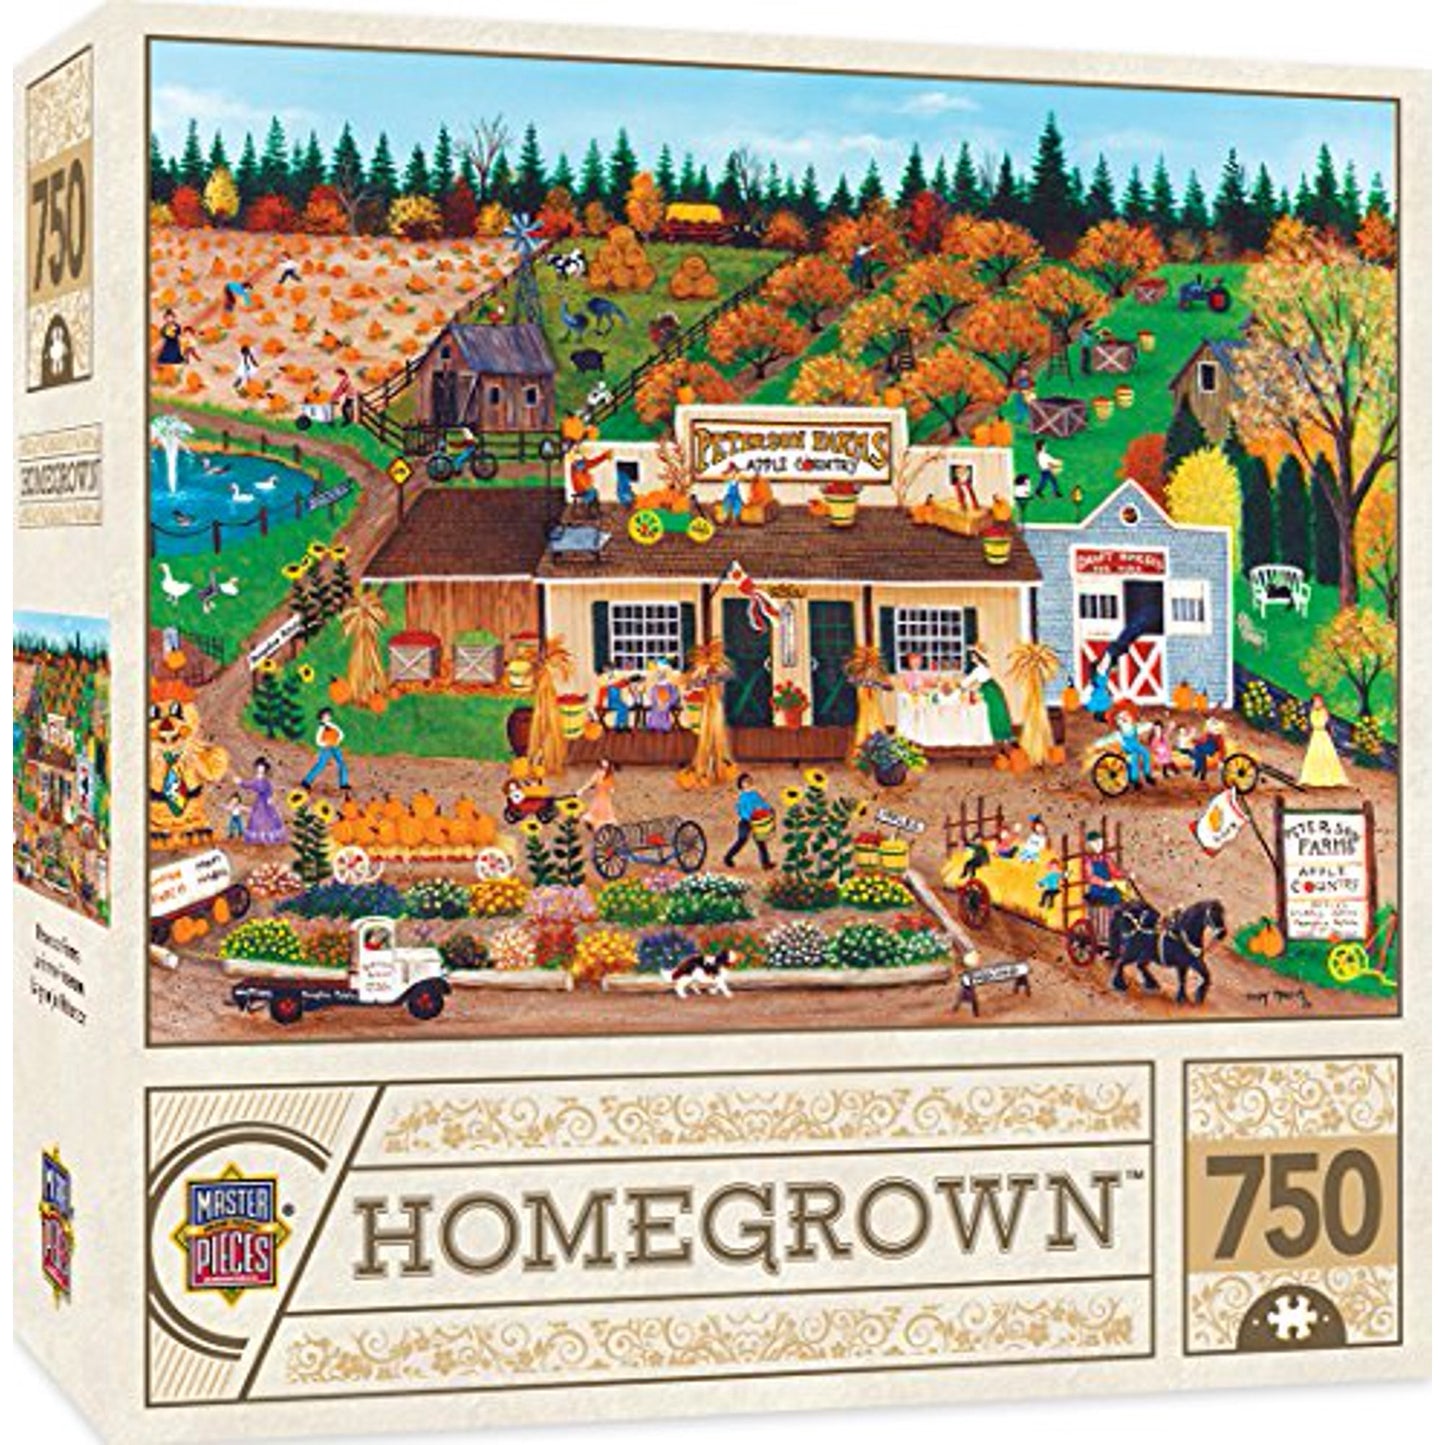 Homegrown Peterson Farm 750 Piece Jigsaw Puzzle by MasterPieces